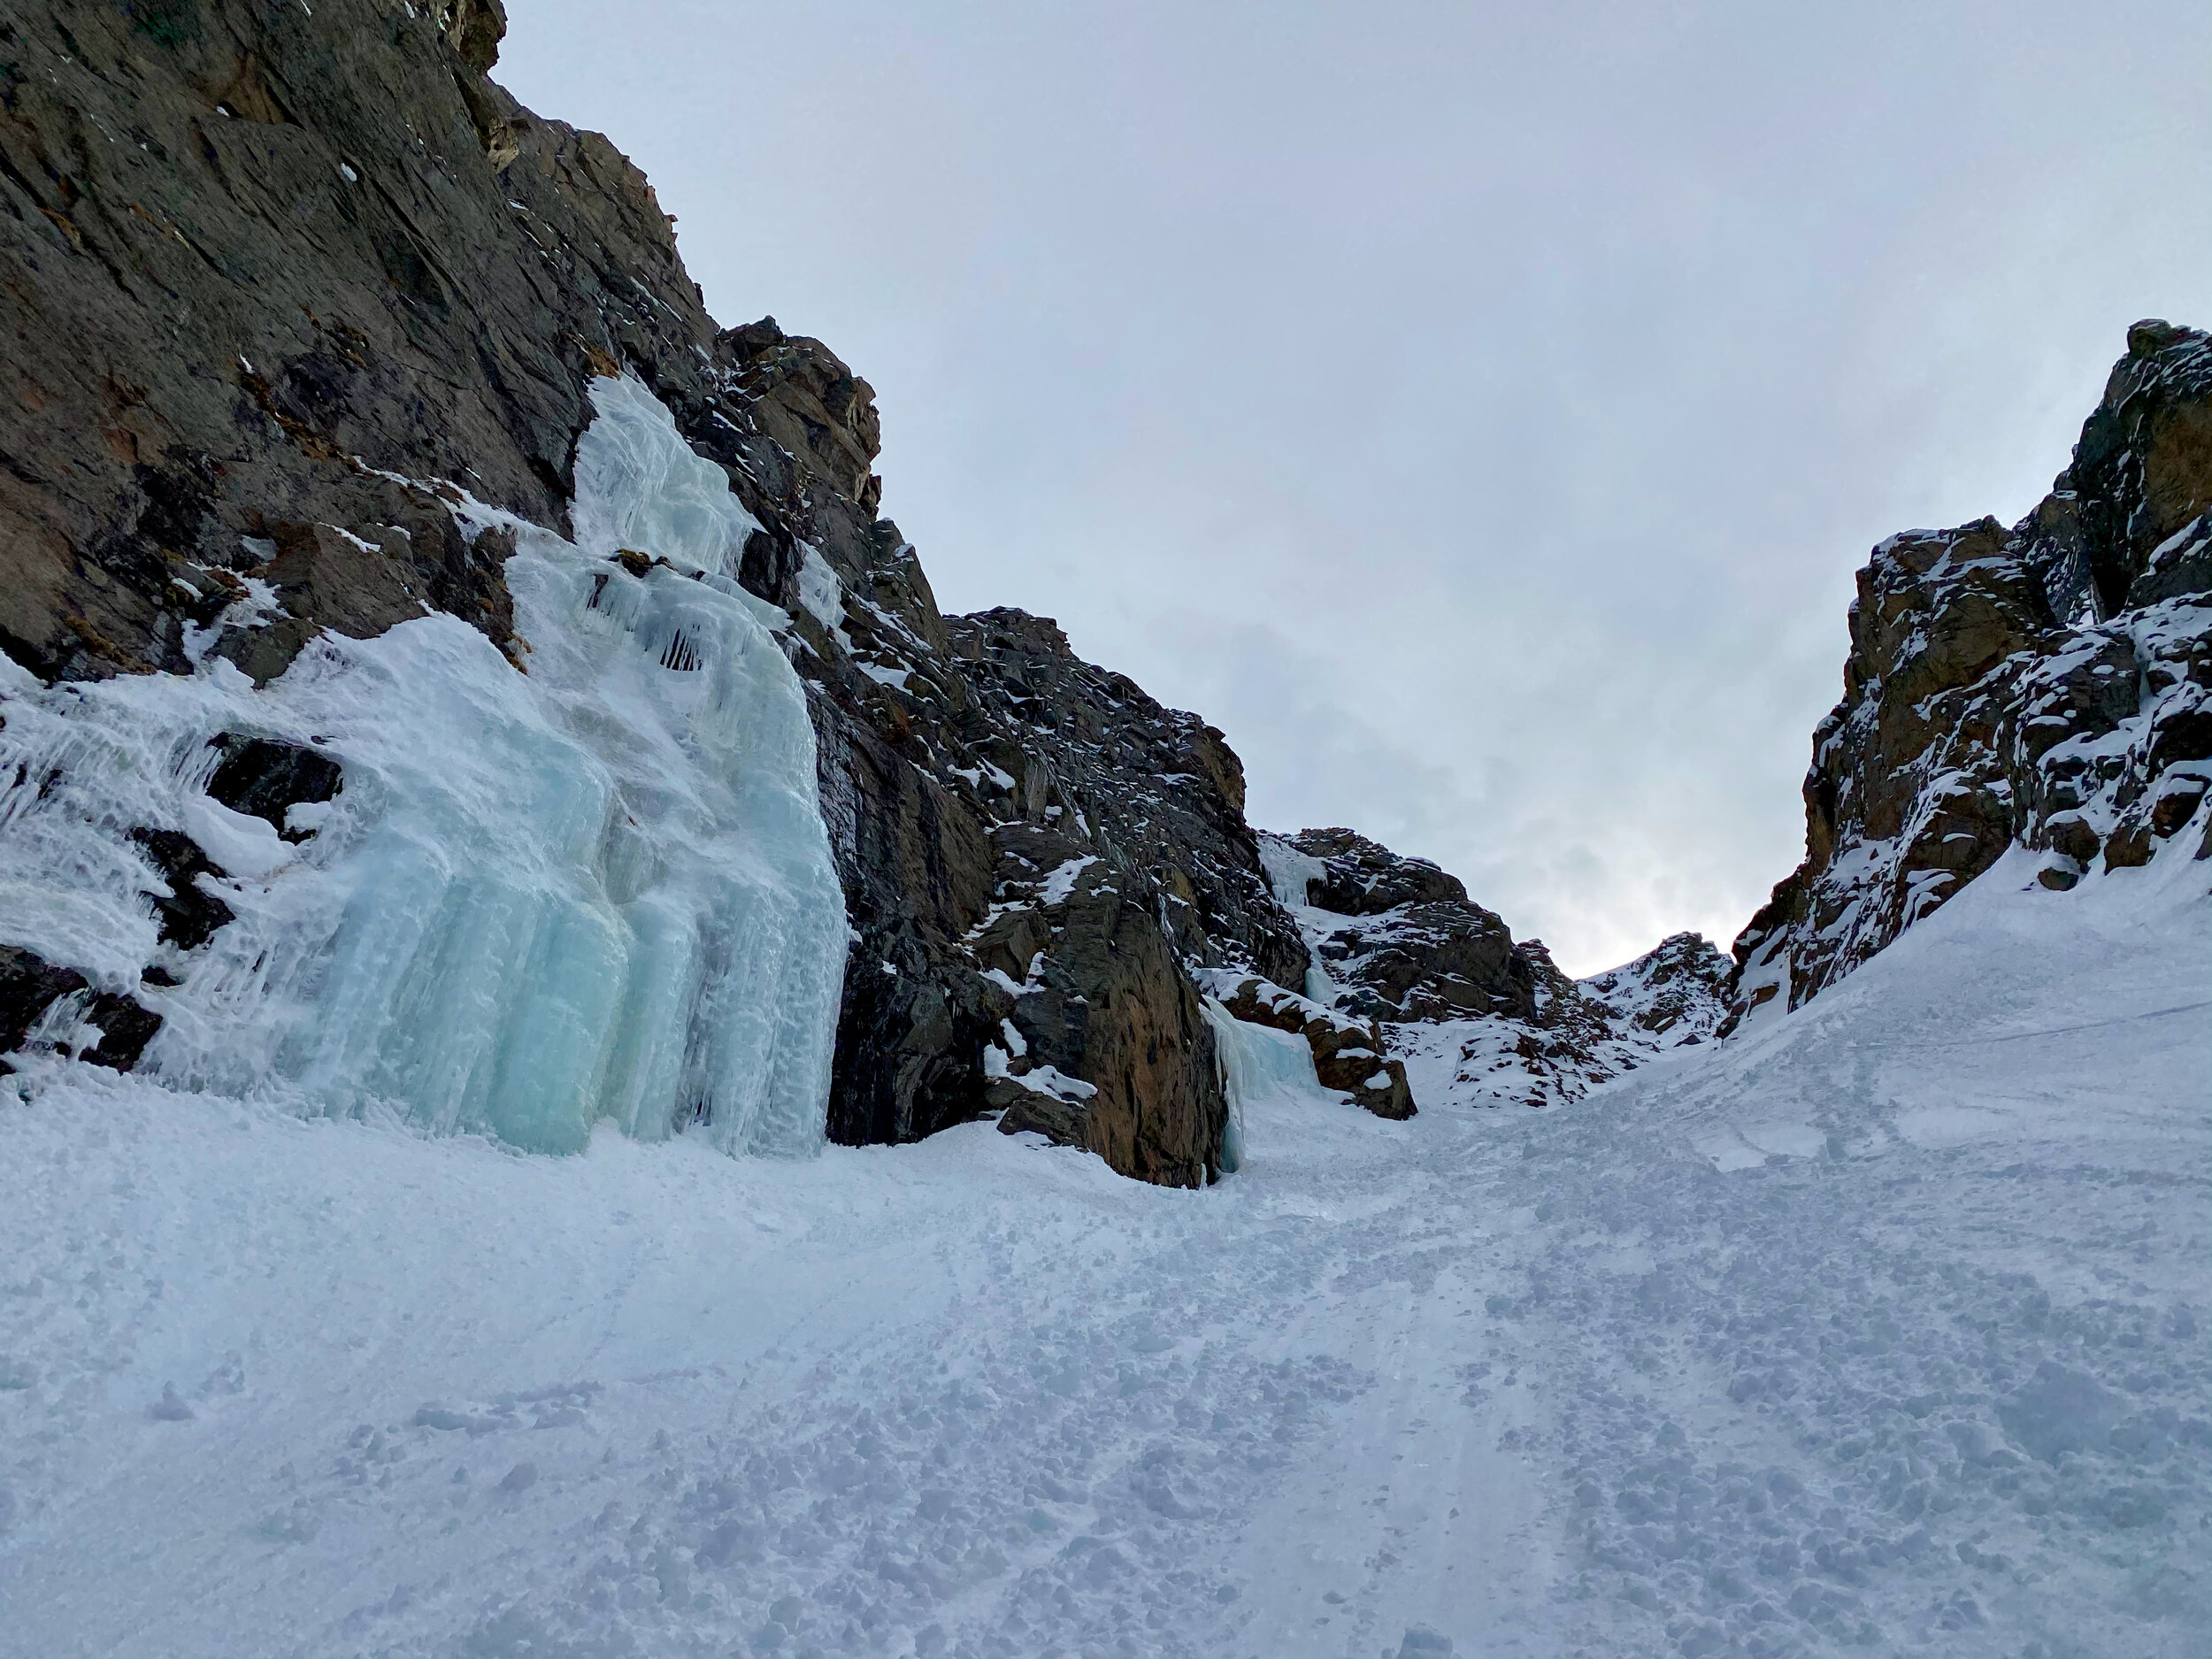 One of the many ice flows lining the walls of the Cham